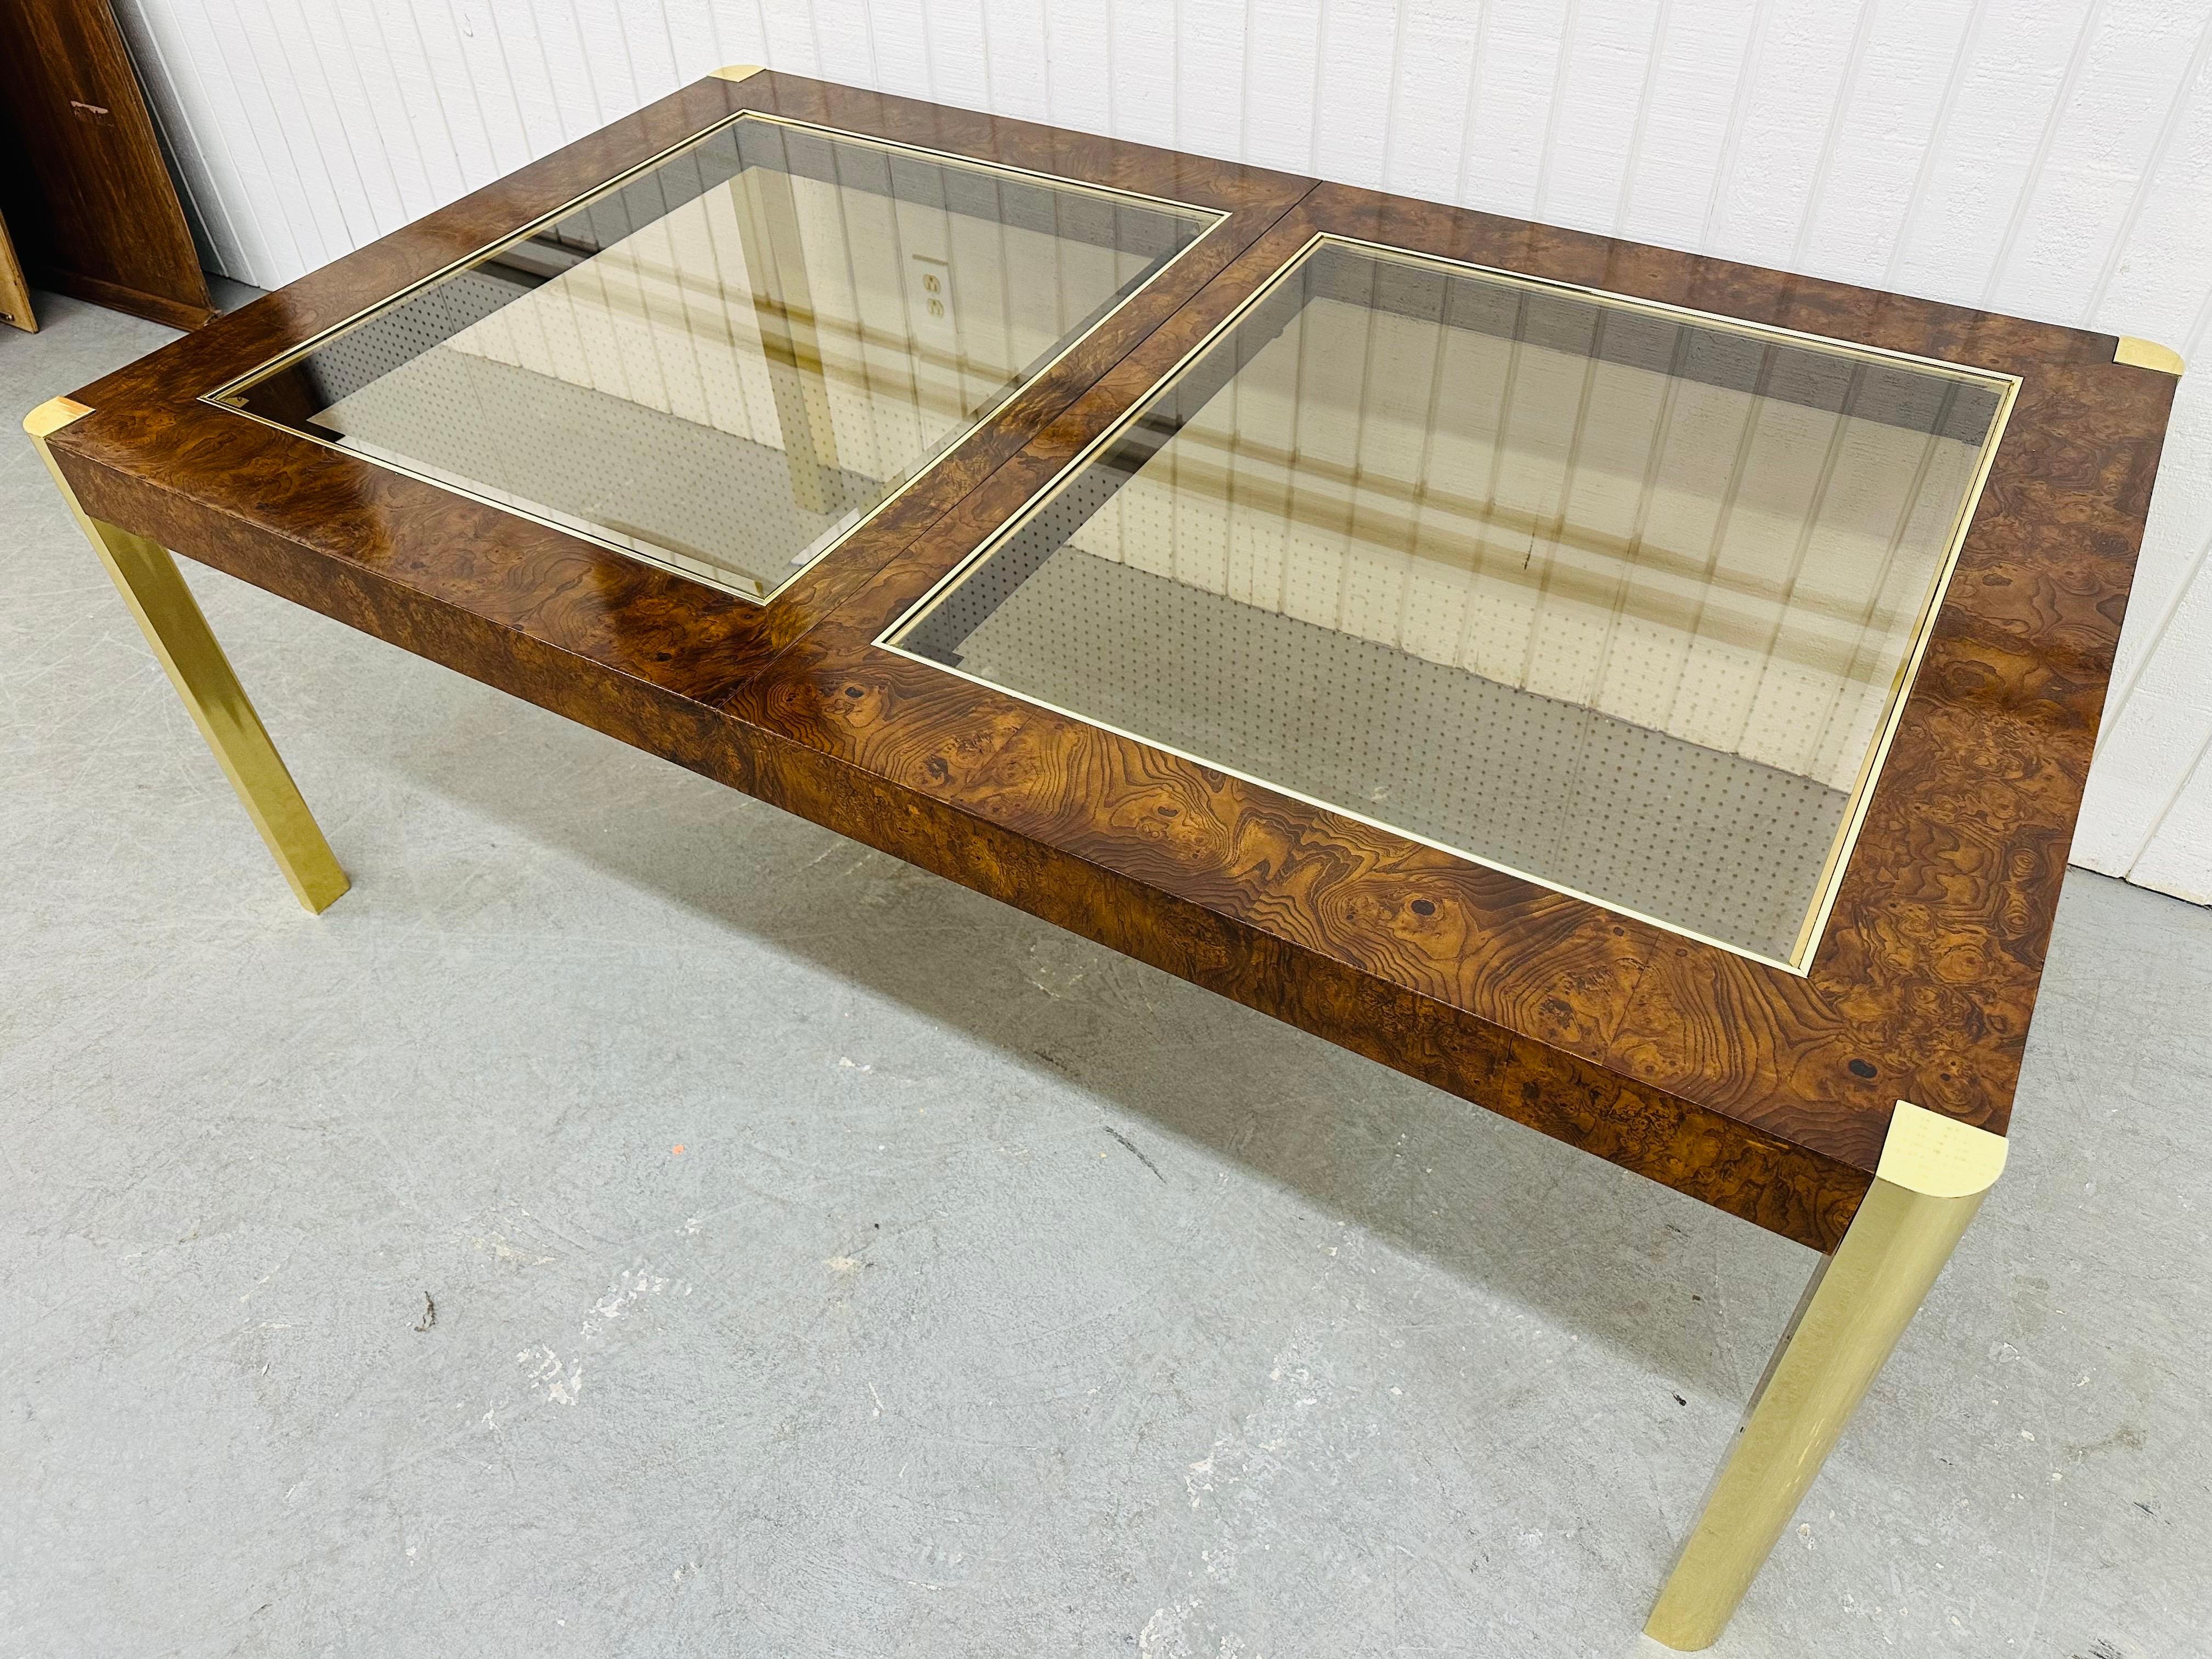 This listing is for a Vintage Century Furniture Burled Walnut Dining Table. Featuring a straight line design, the top is a combination of burled wood and glass inserts, four removable brass legs for easy transport, and two large leaves that extend